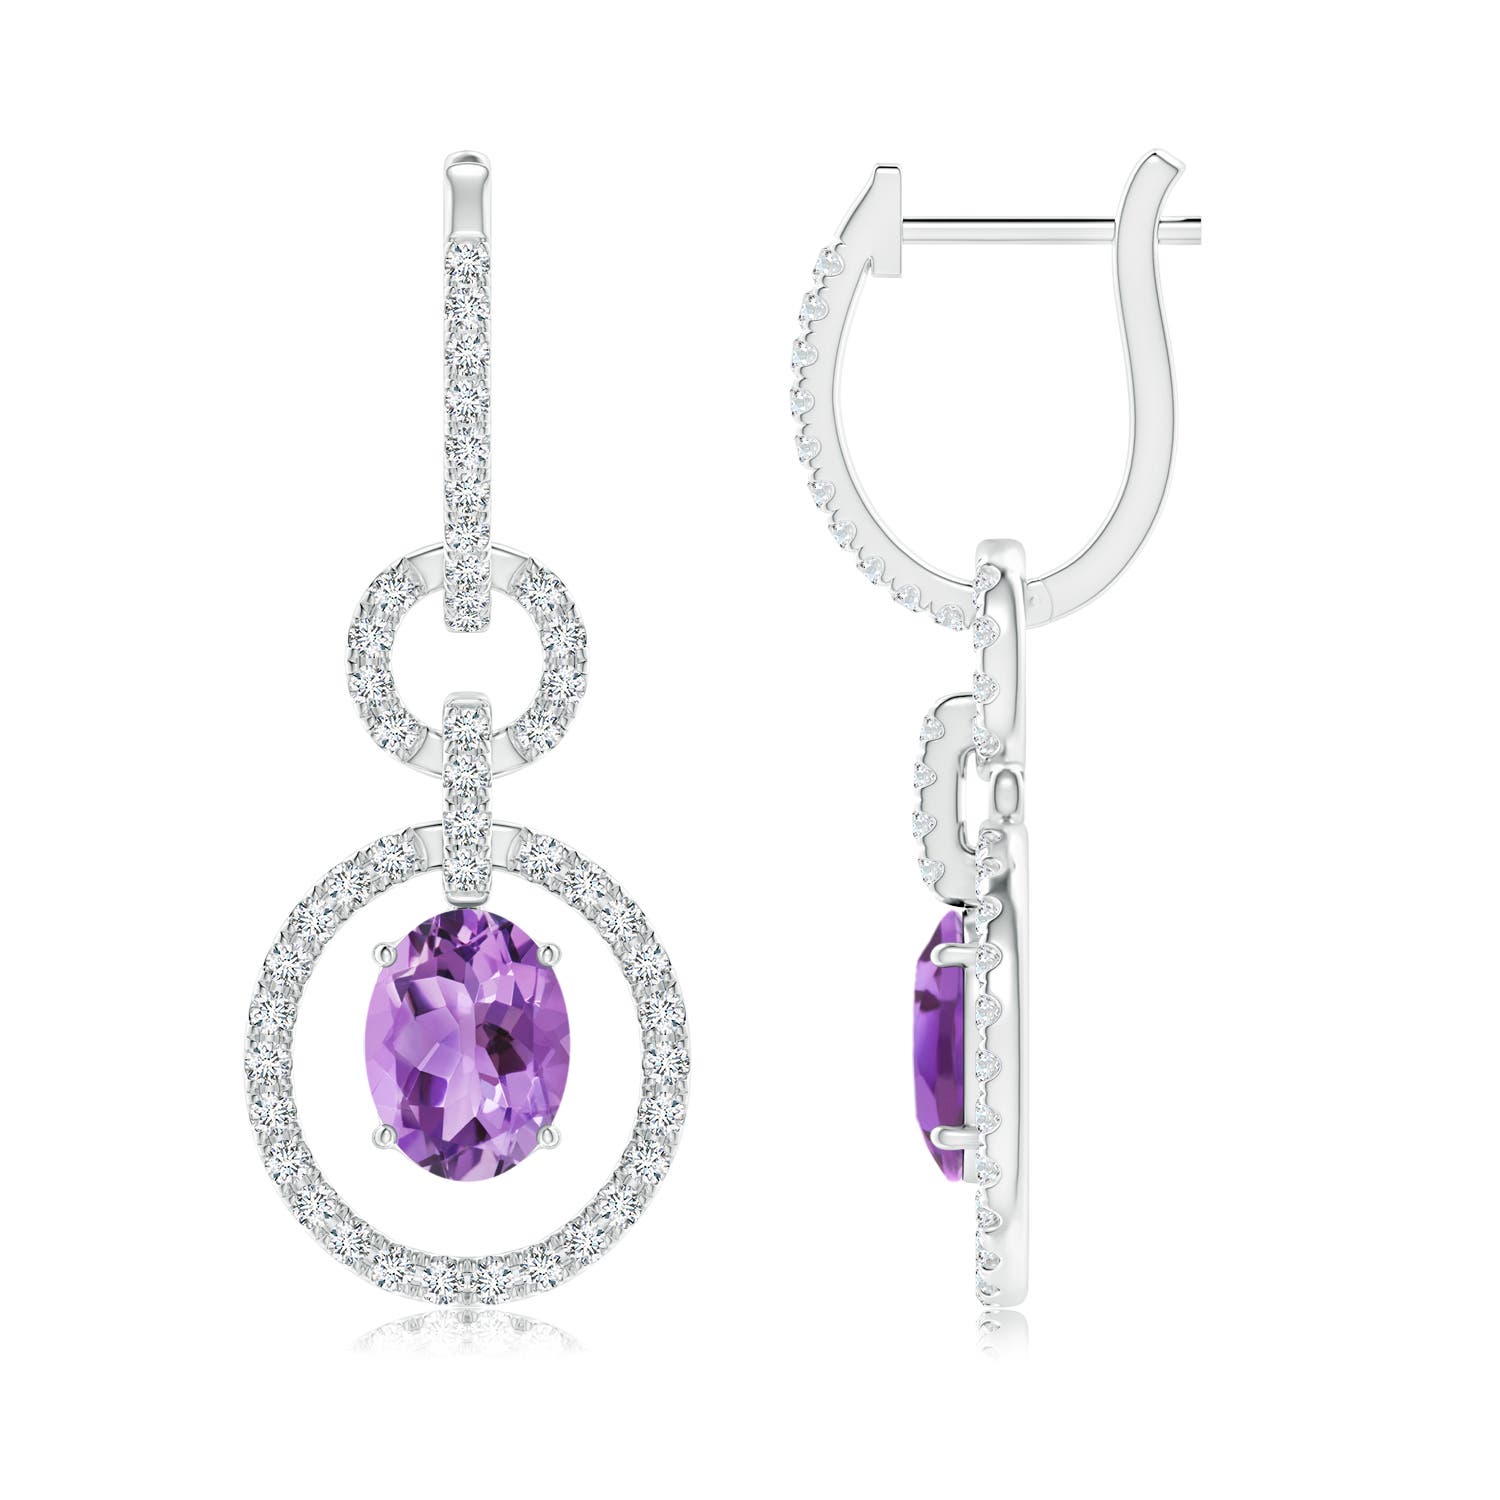 A - Amethyst / 3.08 CT / 14 KT White Gold